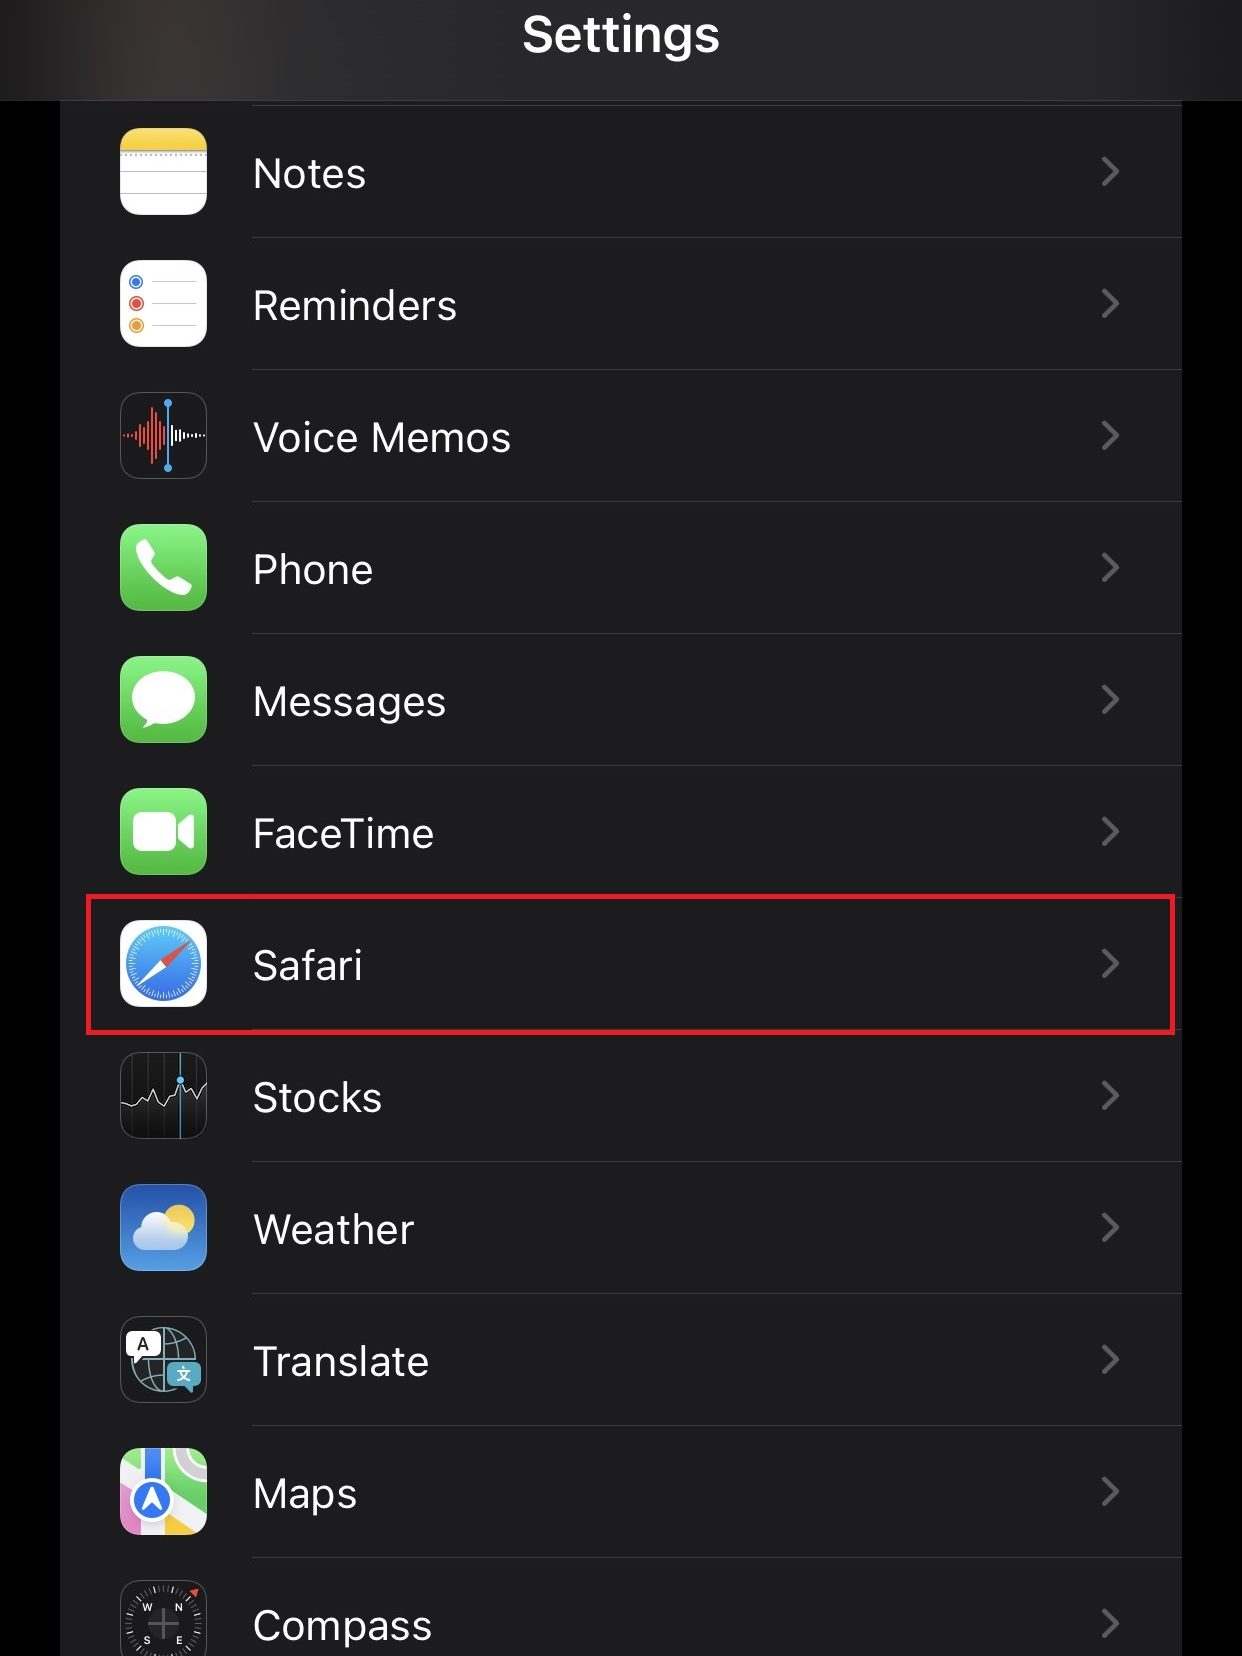 Select Safari under Settings on iPhone to clear cache